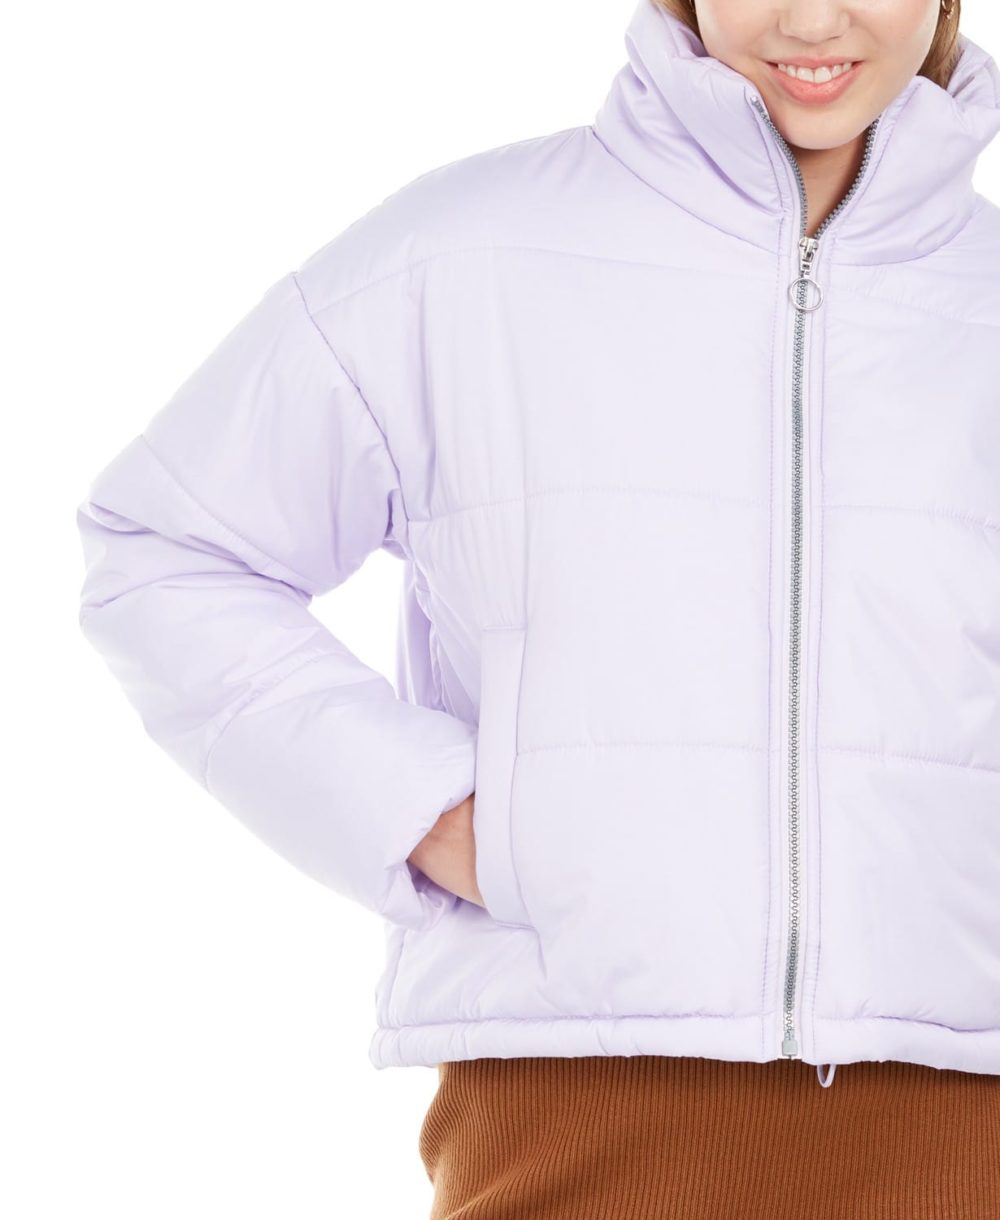 woocommerce-673321-2209615.cloudwaysapps.com-celebrity-pink-womens-lavender-cropped-puffer-jacket